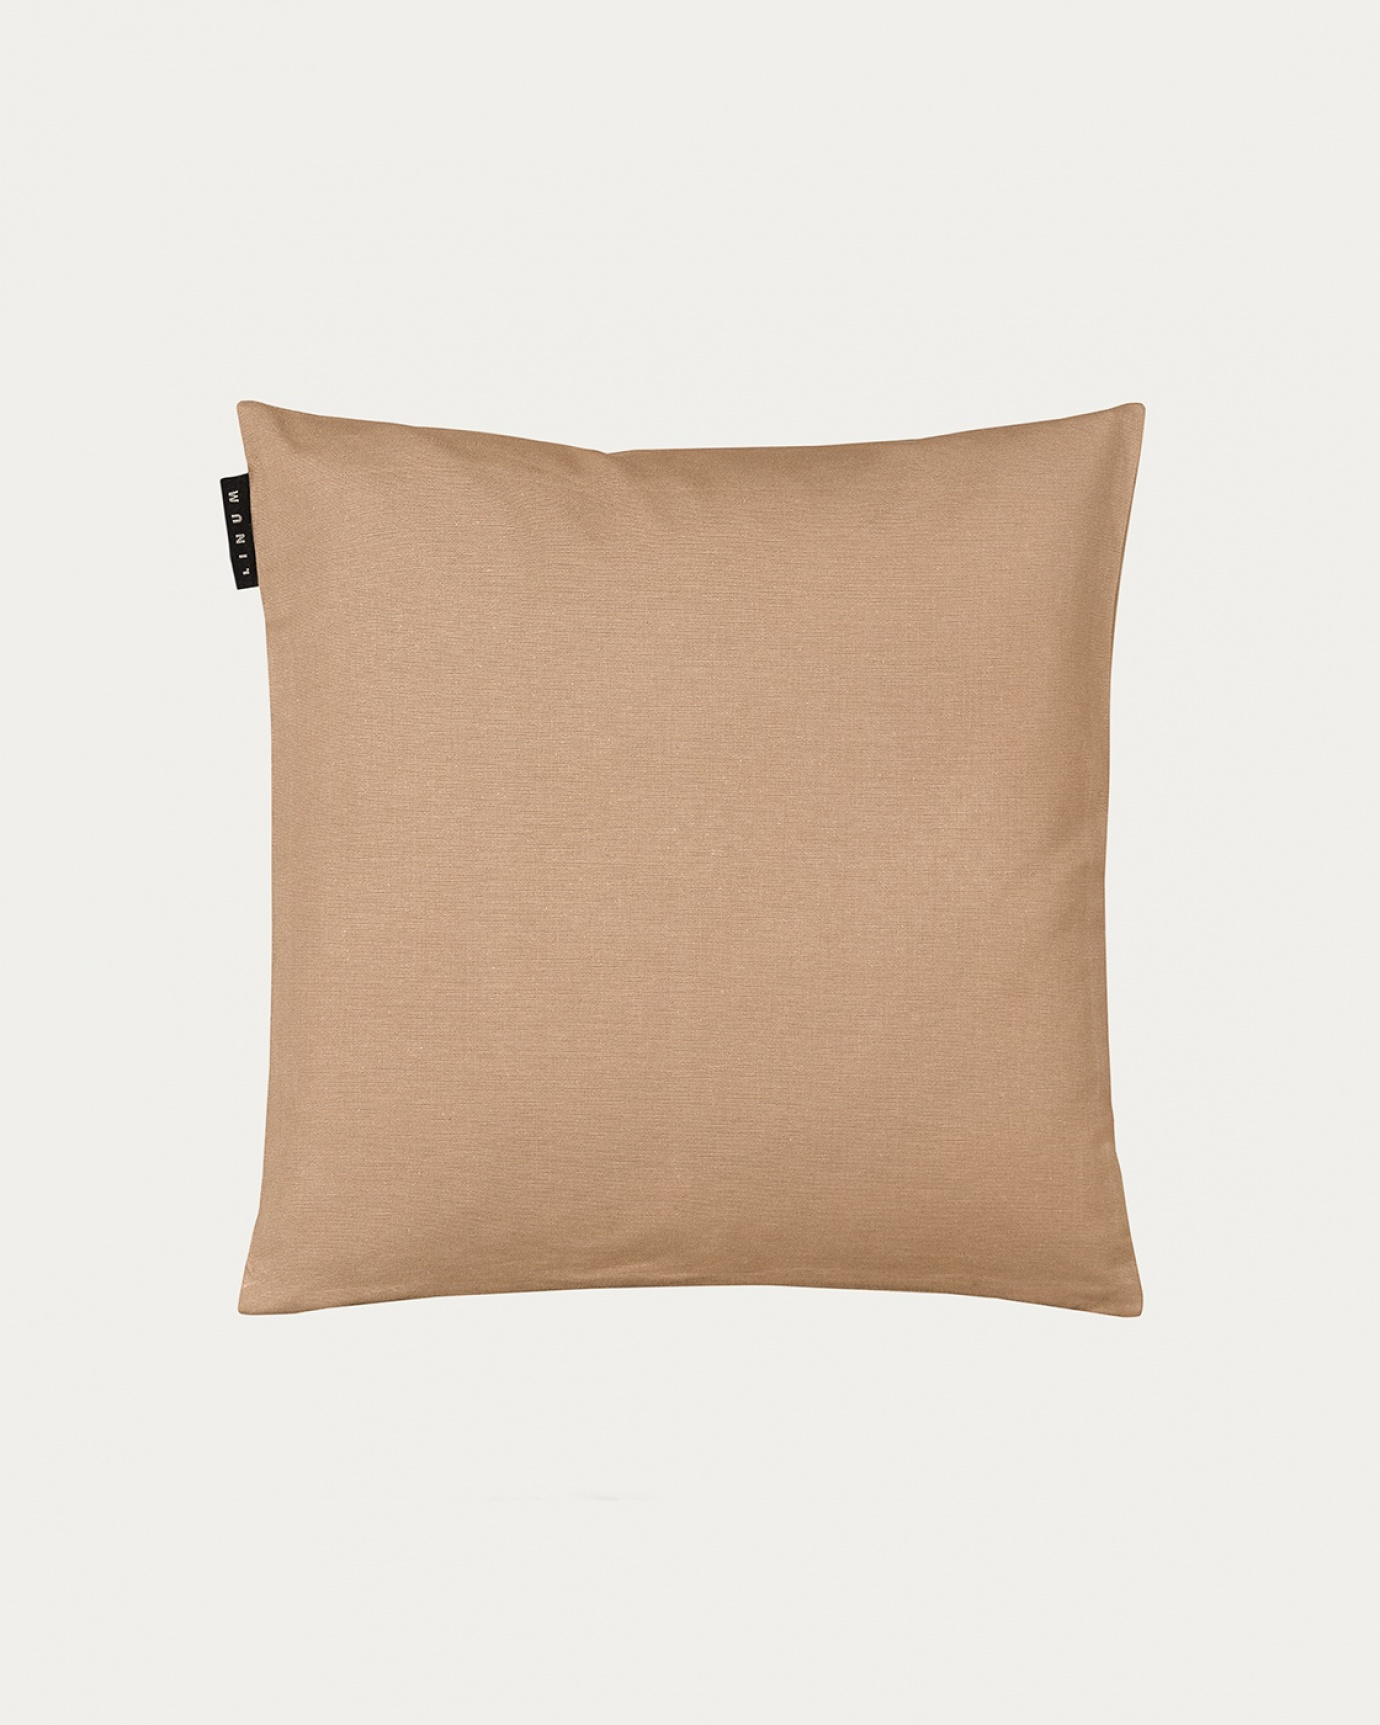 Product image camel brown ANNABELL cushion cover made of soft cotton from LINUM DESIGN. Size 40x40 cm.